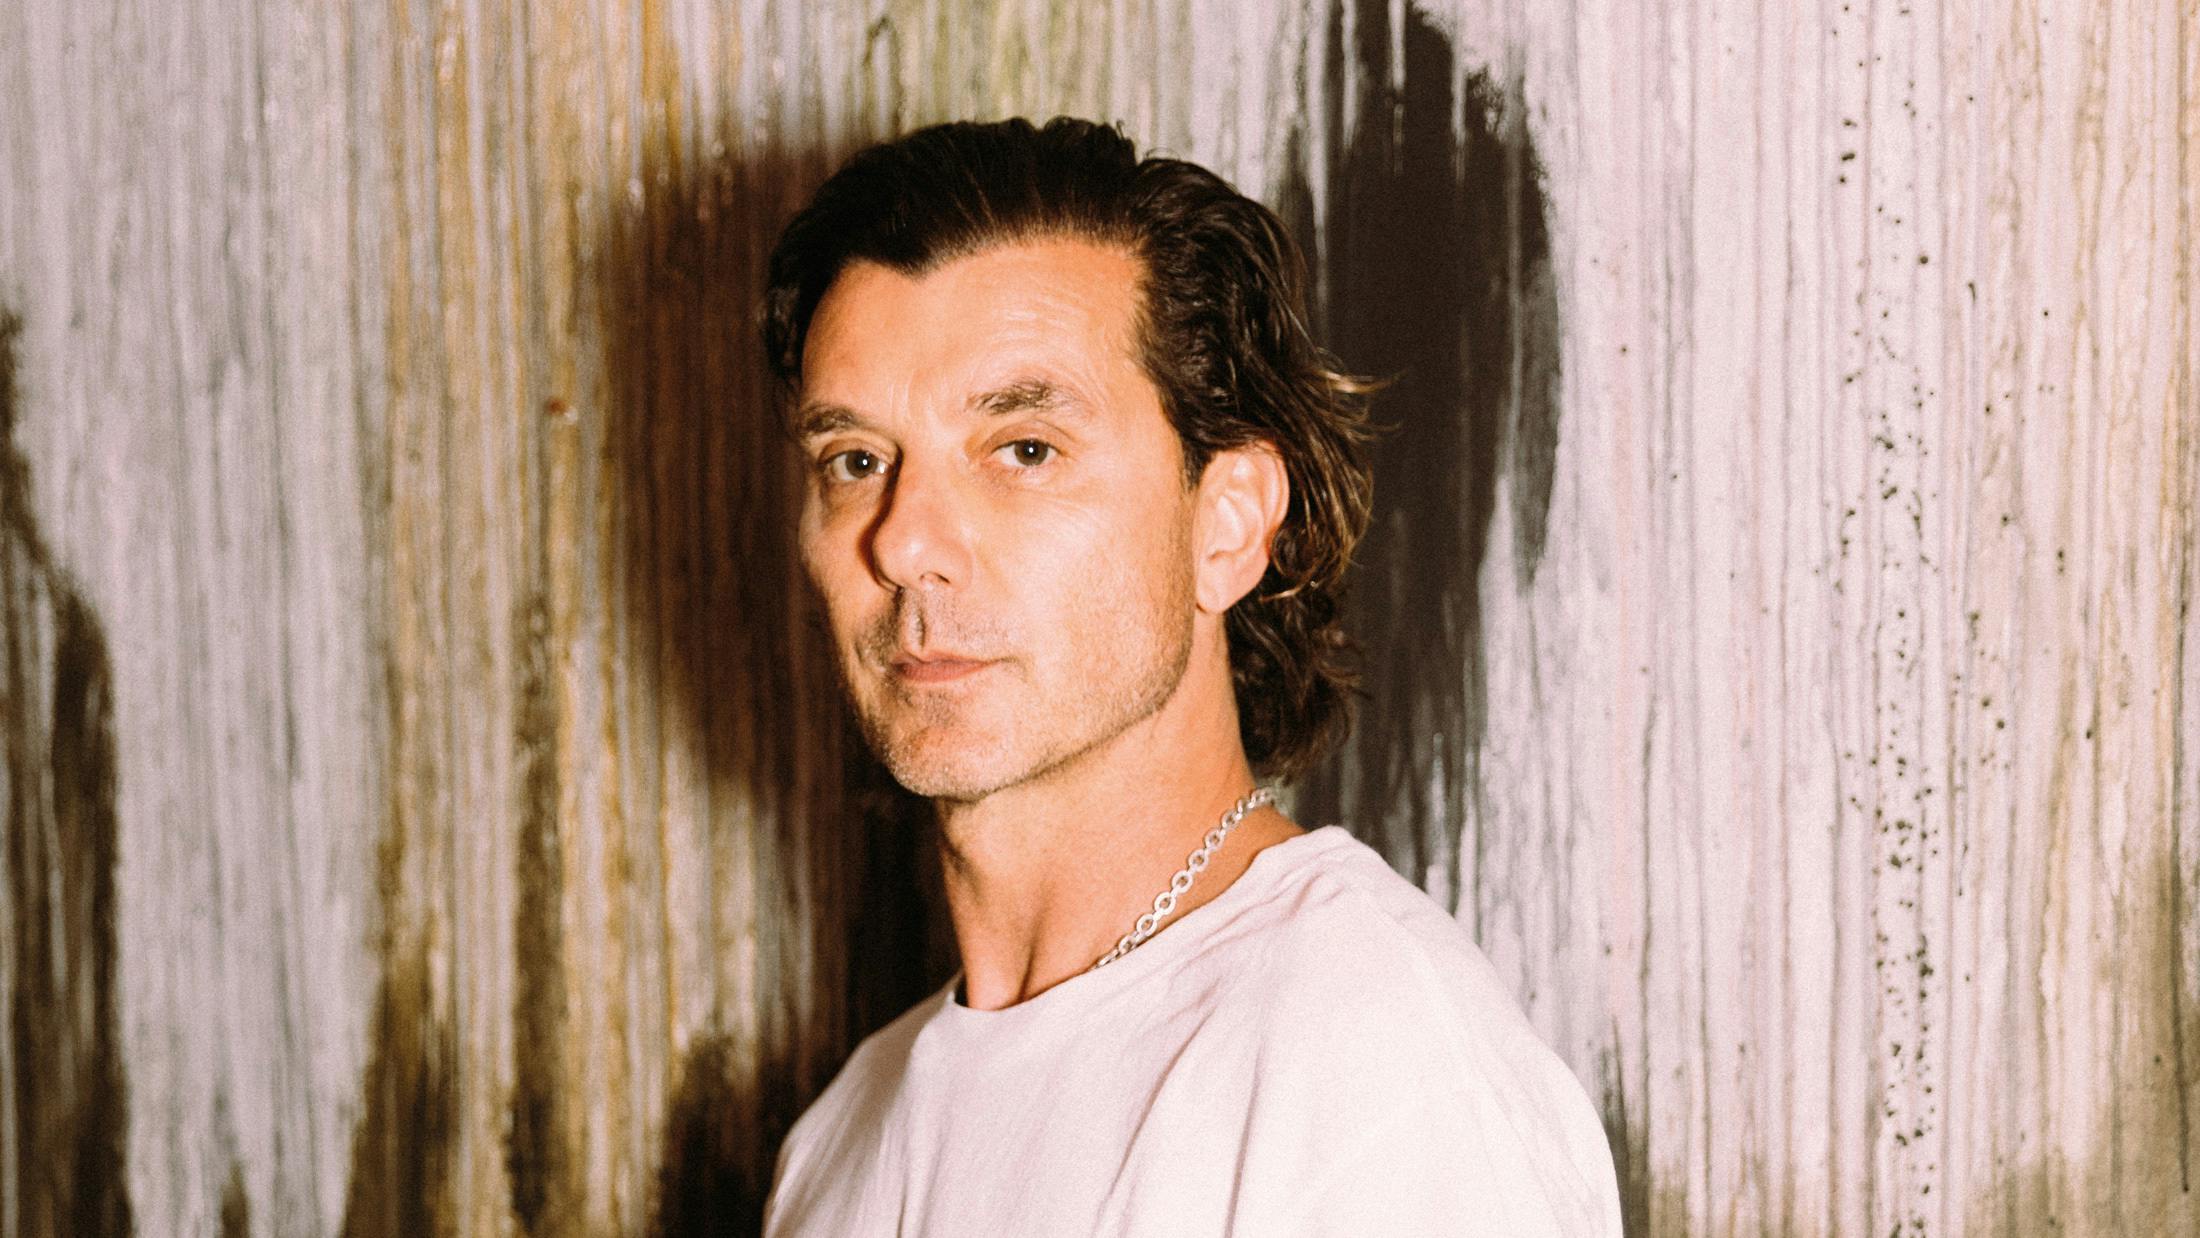 Bush’s Gavin Rossdale: “When you’re successful you get headbutted often… But I’m half-Scottish, I can take it”